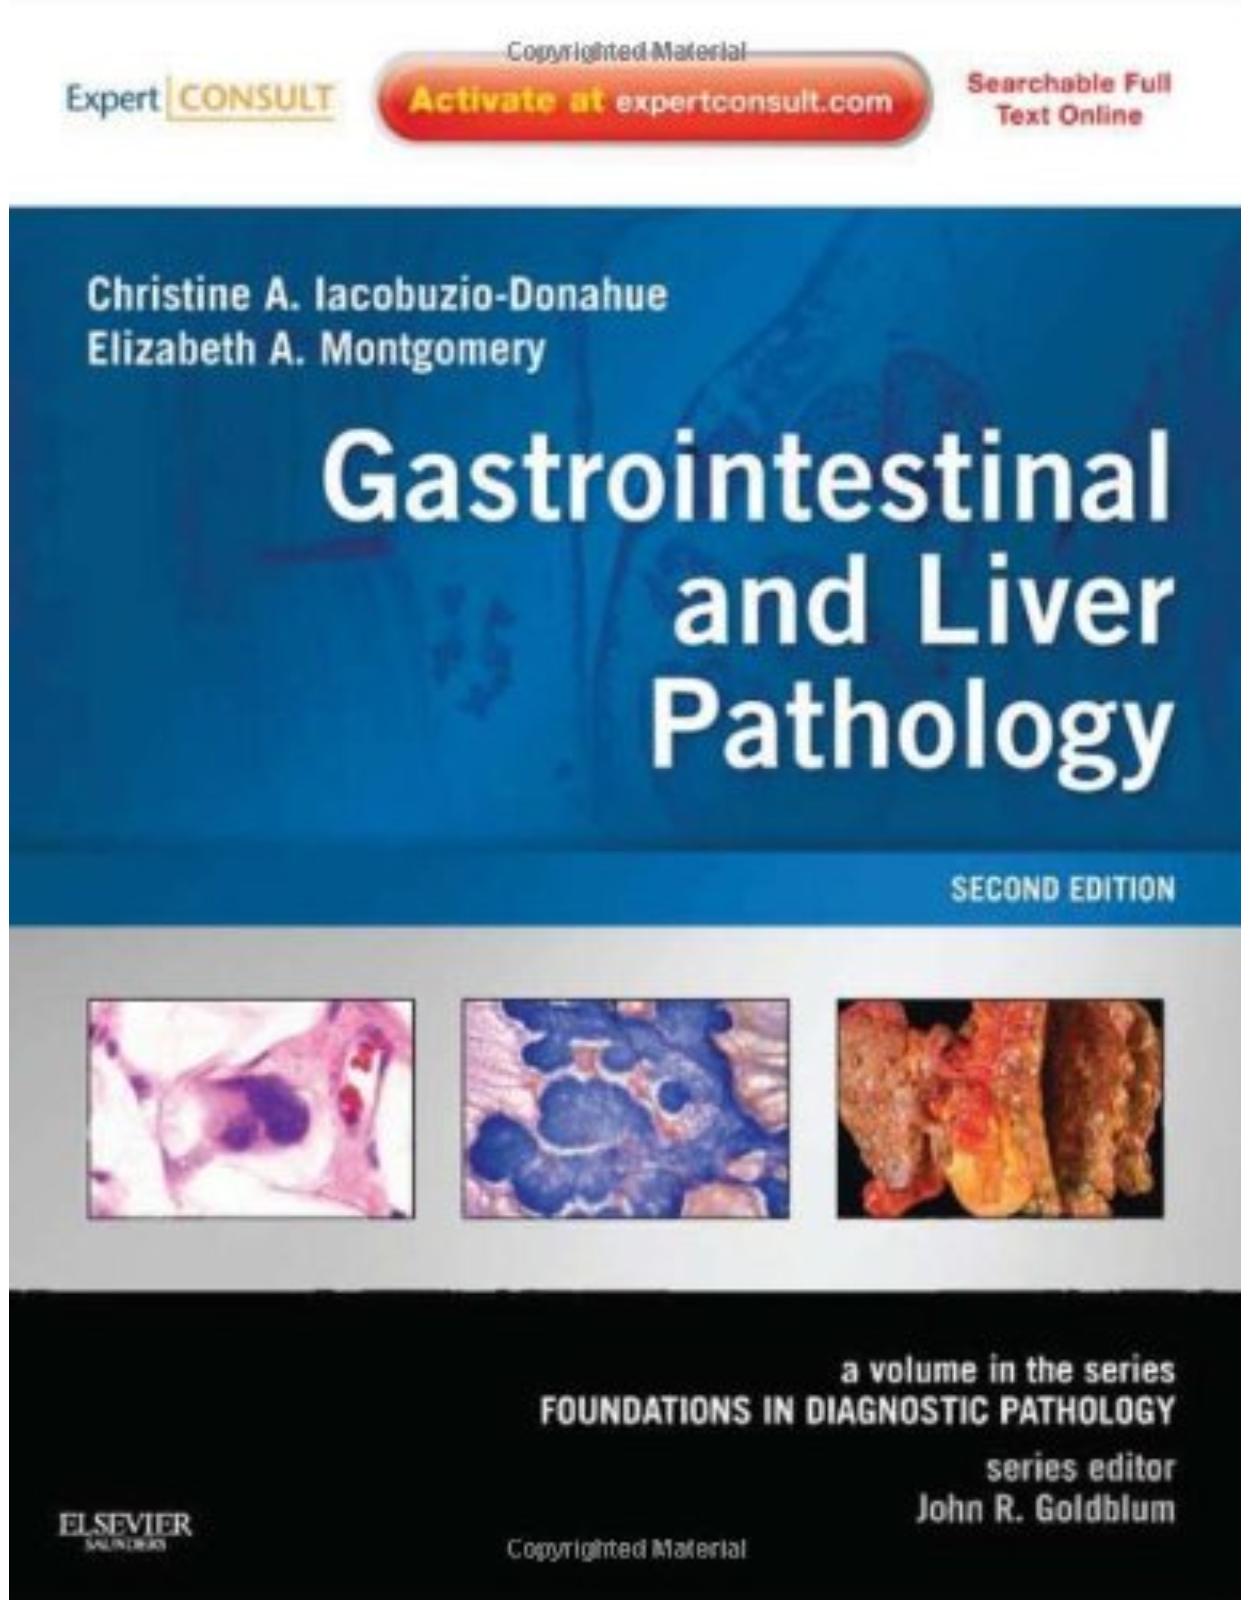 Gastrointestinal and Liver Pathology, 2nd Edition